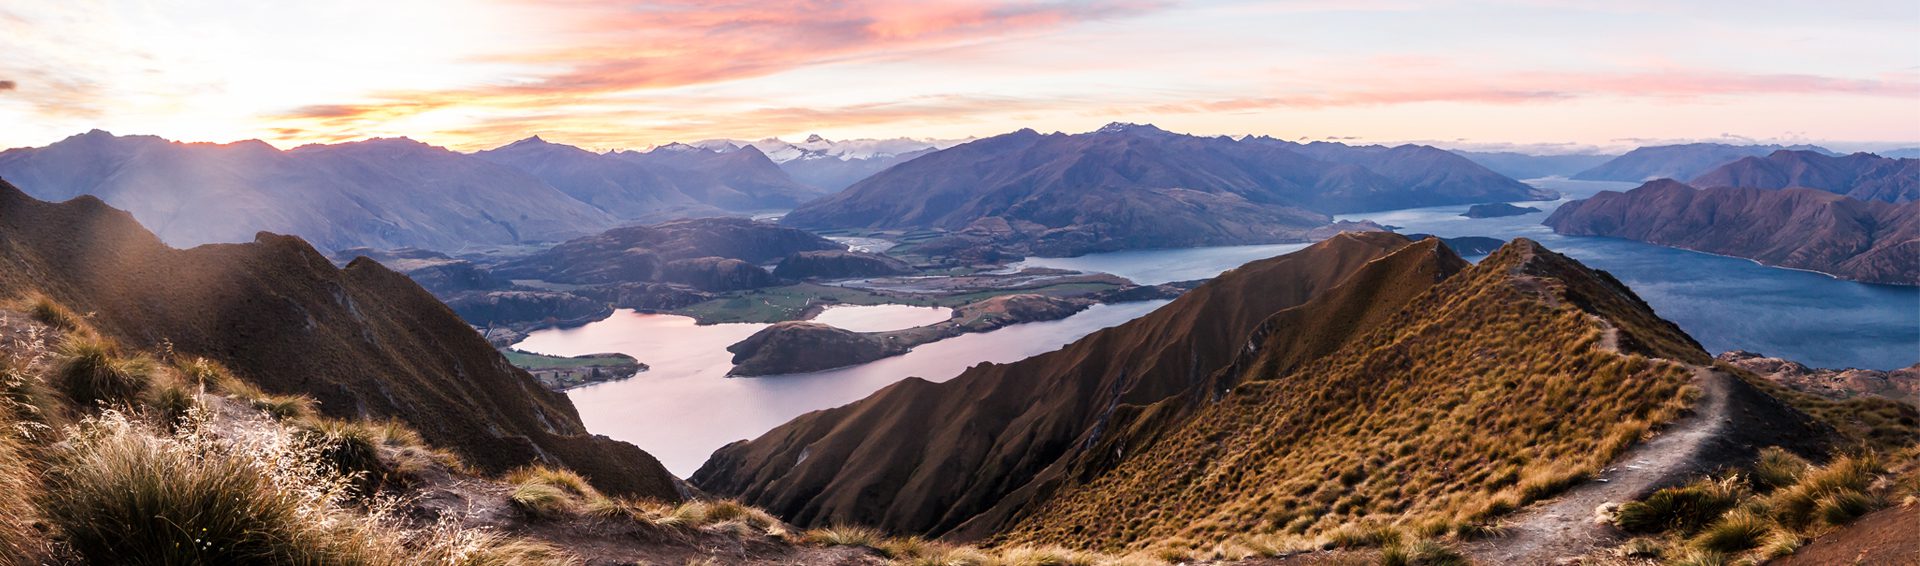 New Zealand at a Glance